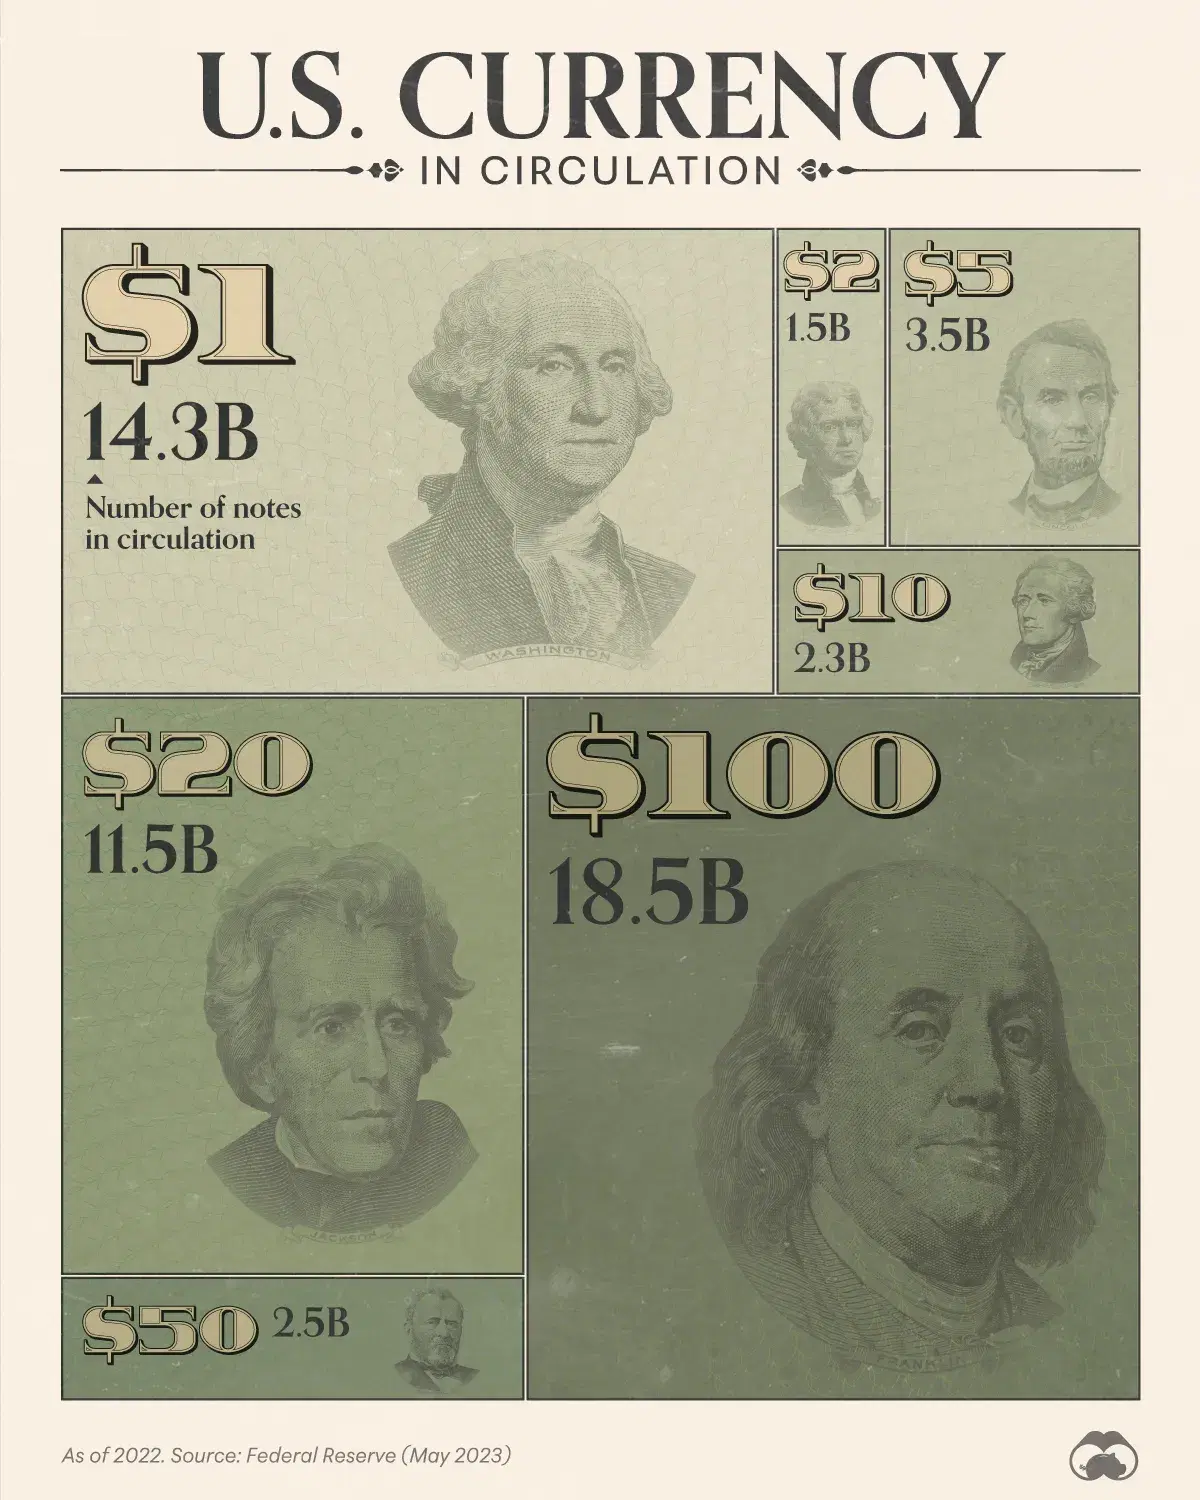 The $100 Bill is the Most Popular U.S. Note in Circulation 💵